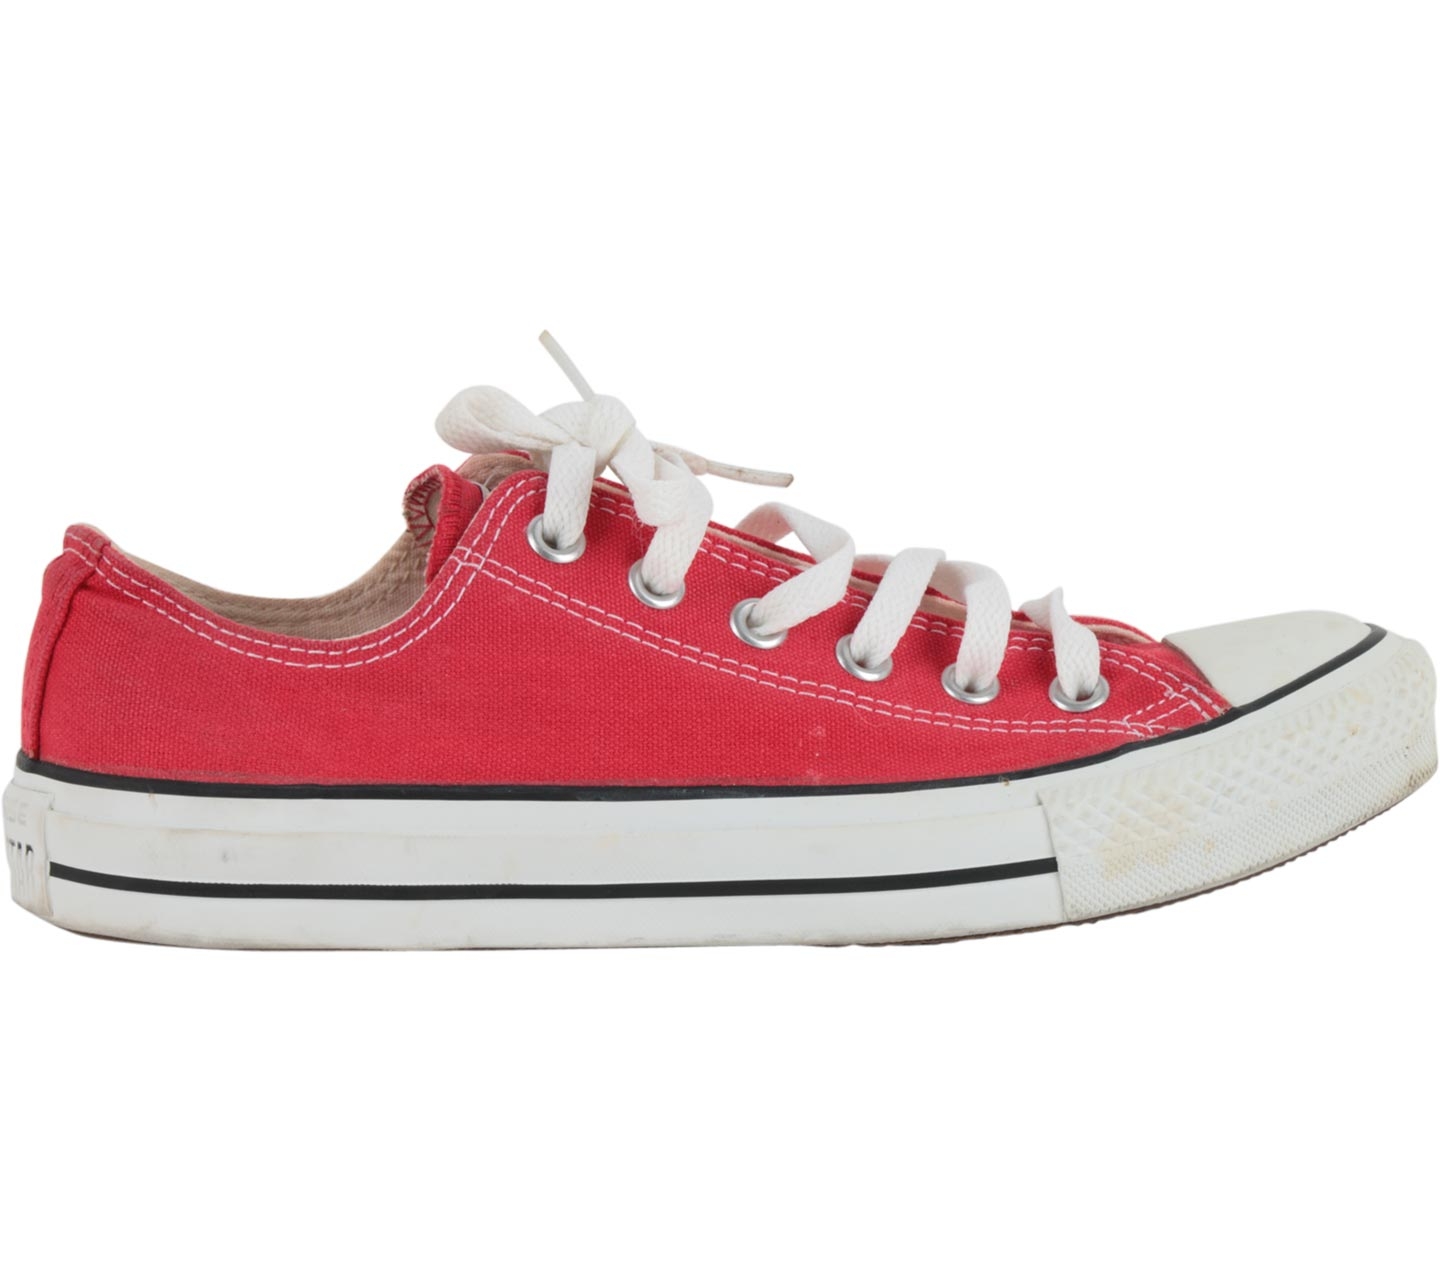 Converse Red Sneakers